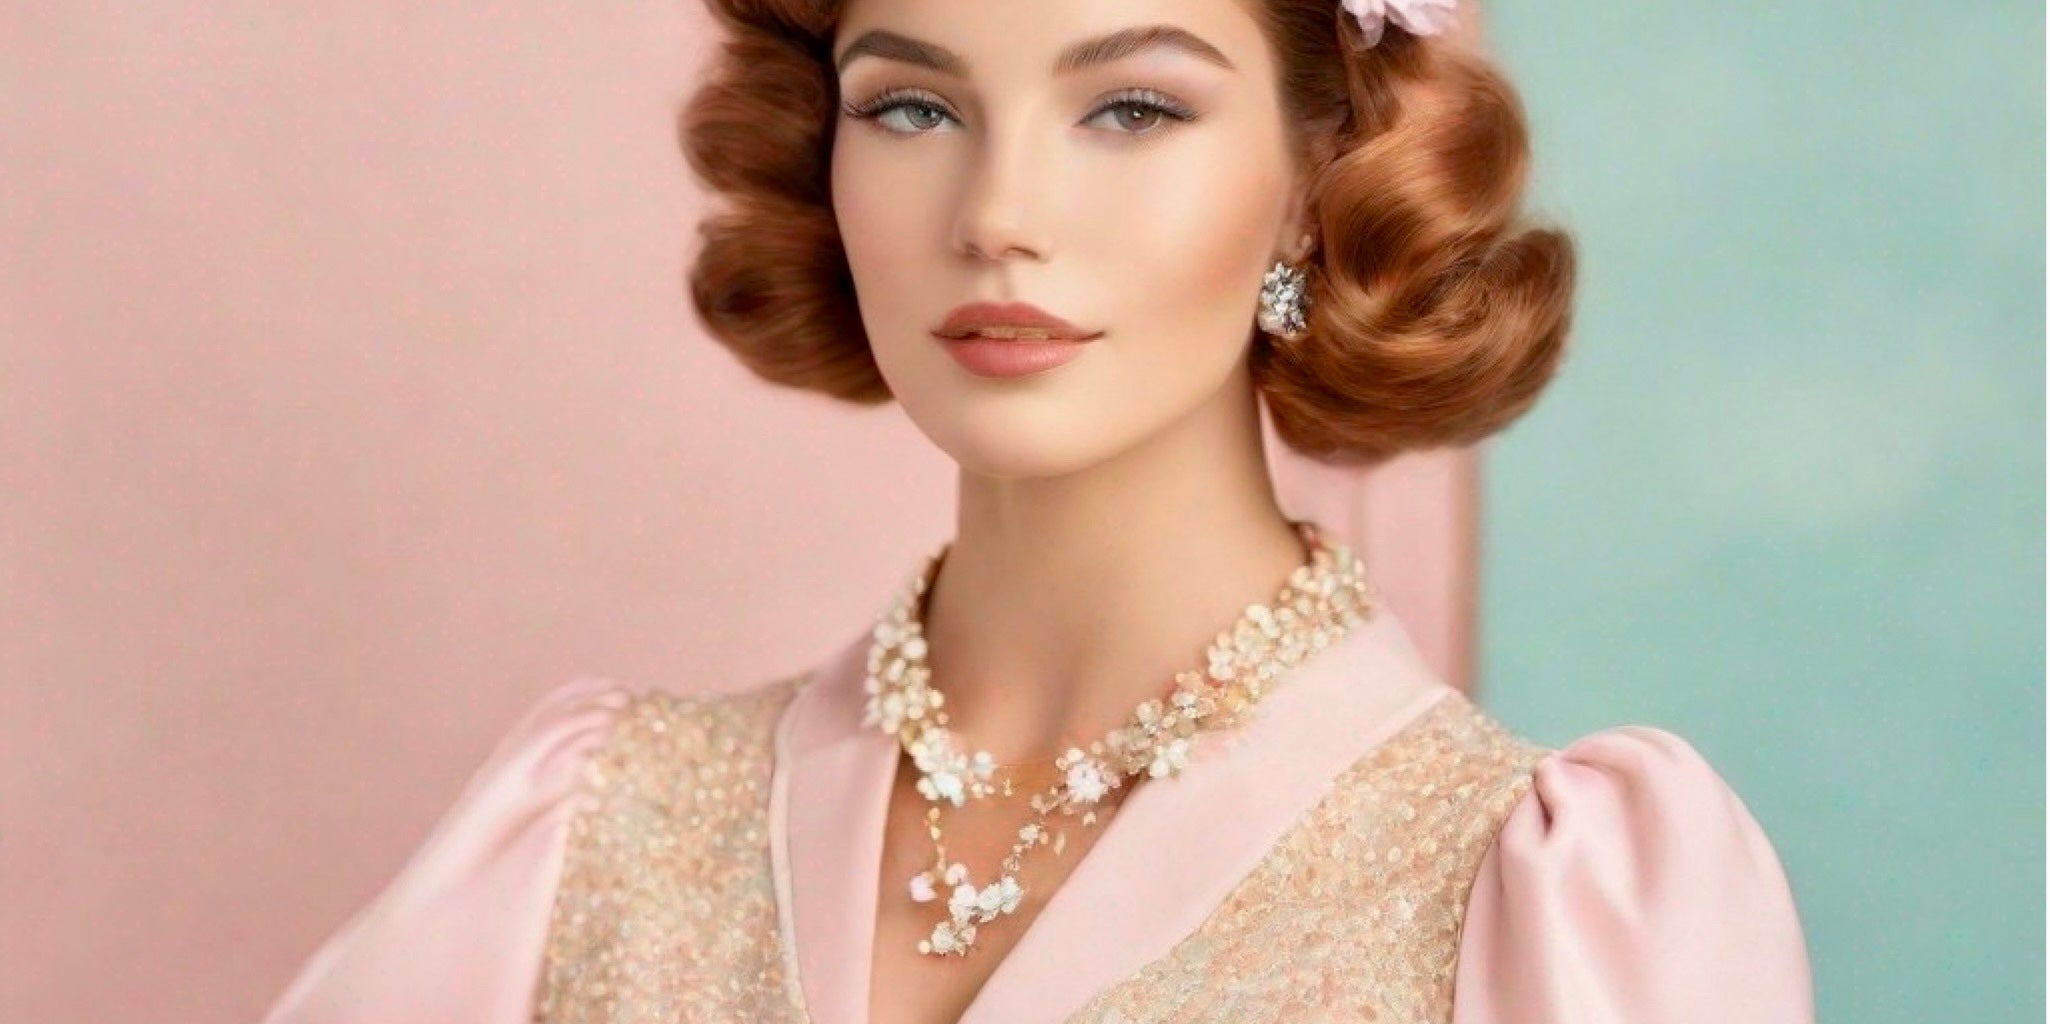 Woman dressed in circa 1950s clothing and jewelry against pink and green background